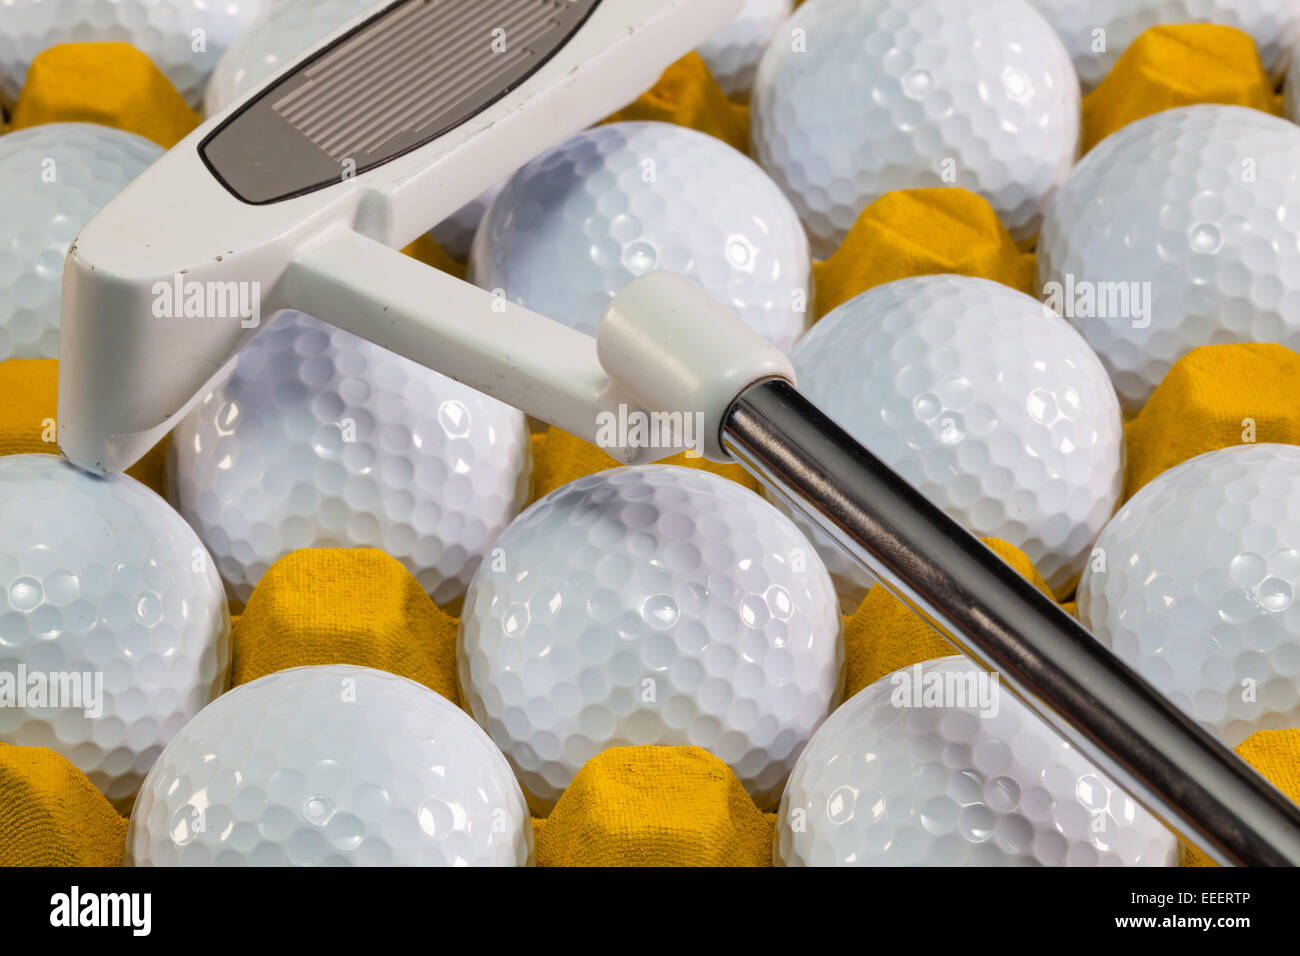 White golf balls in the yellow box and golf equipments Stock Photo